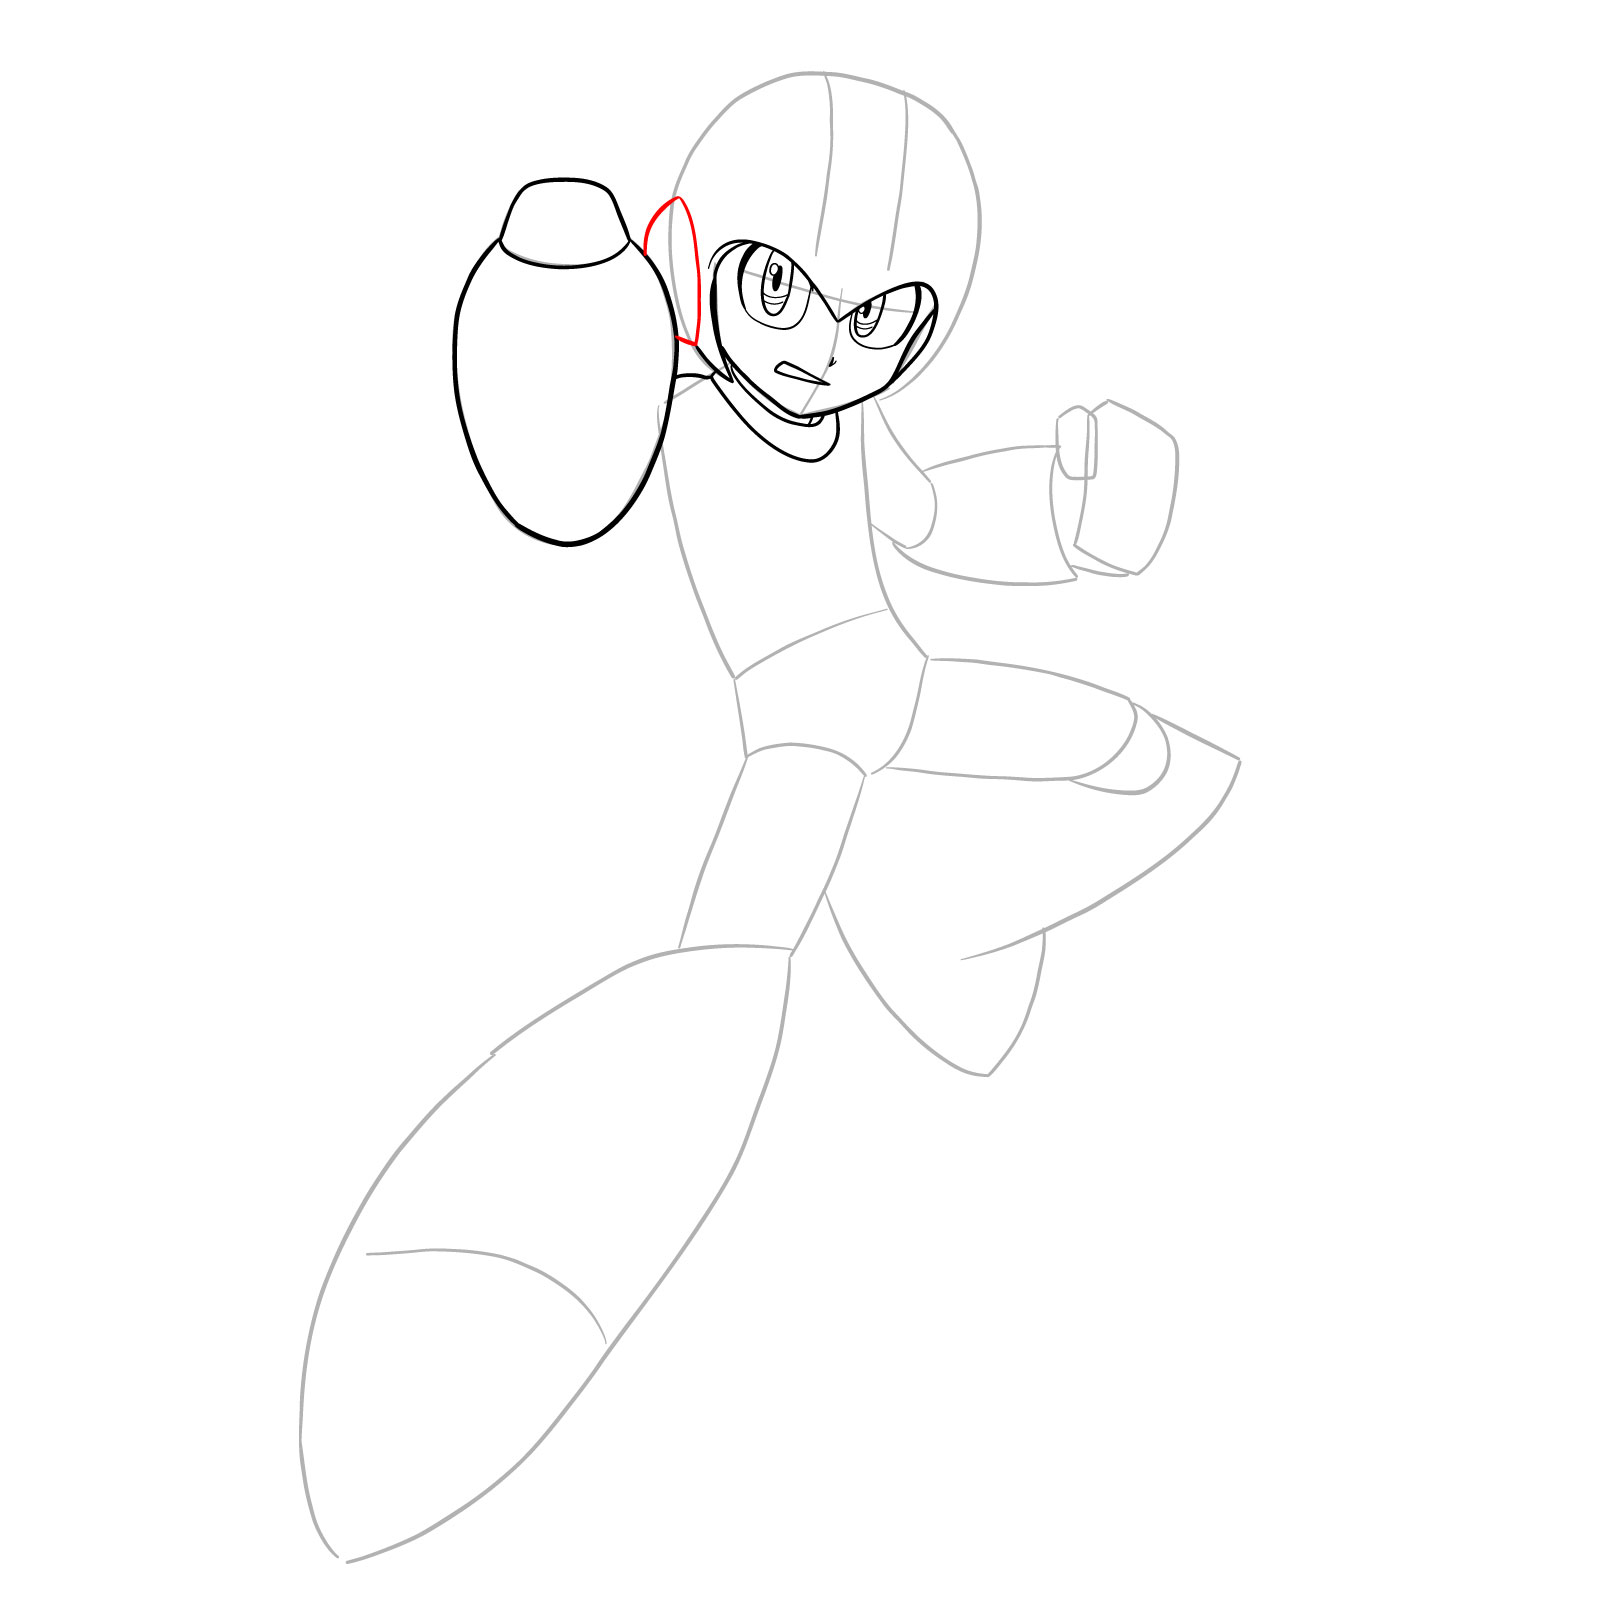 How to draw Mega Man from the 11th game - step 12